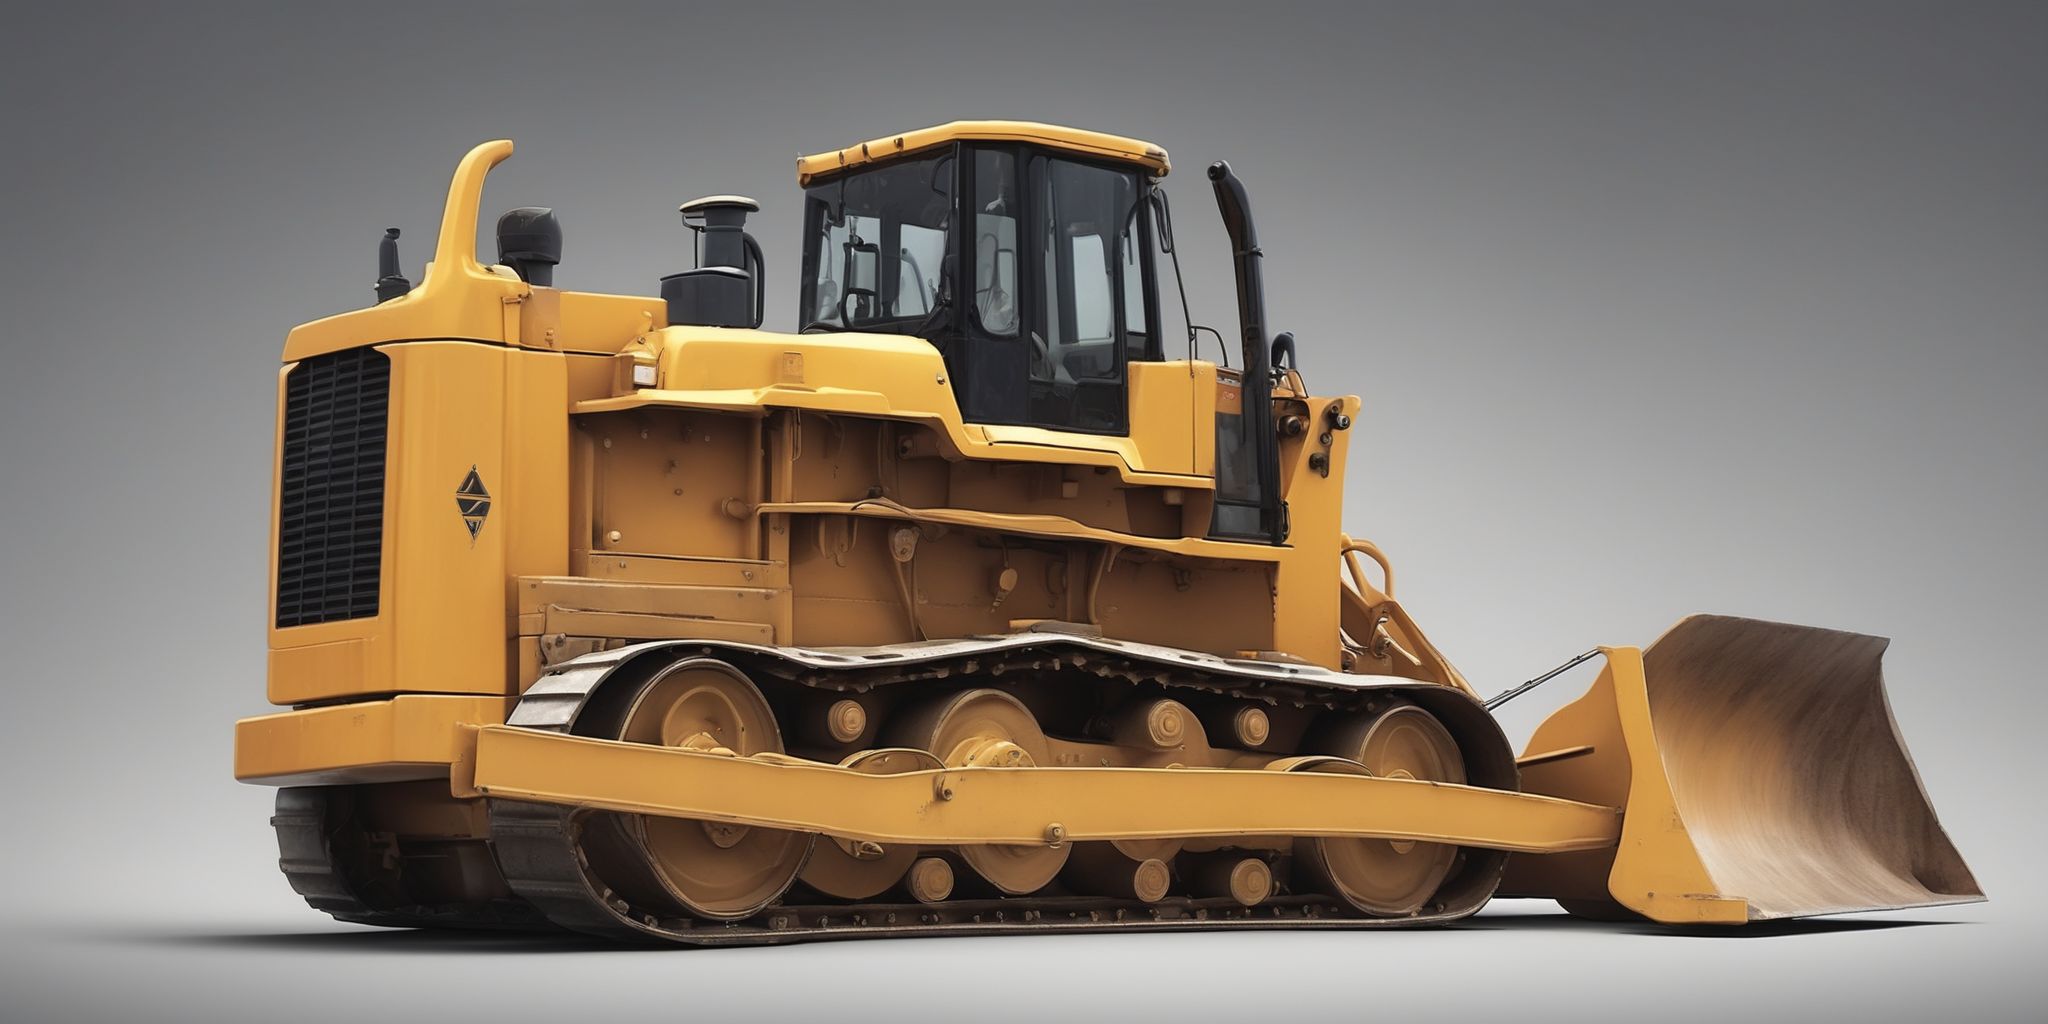 Bulldozer  in realistic, photographic style